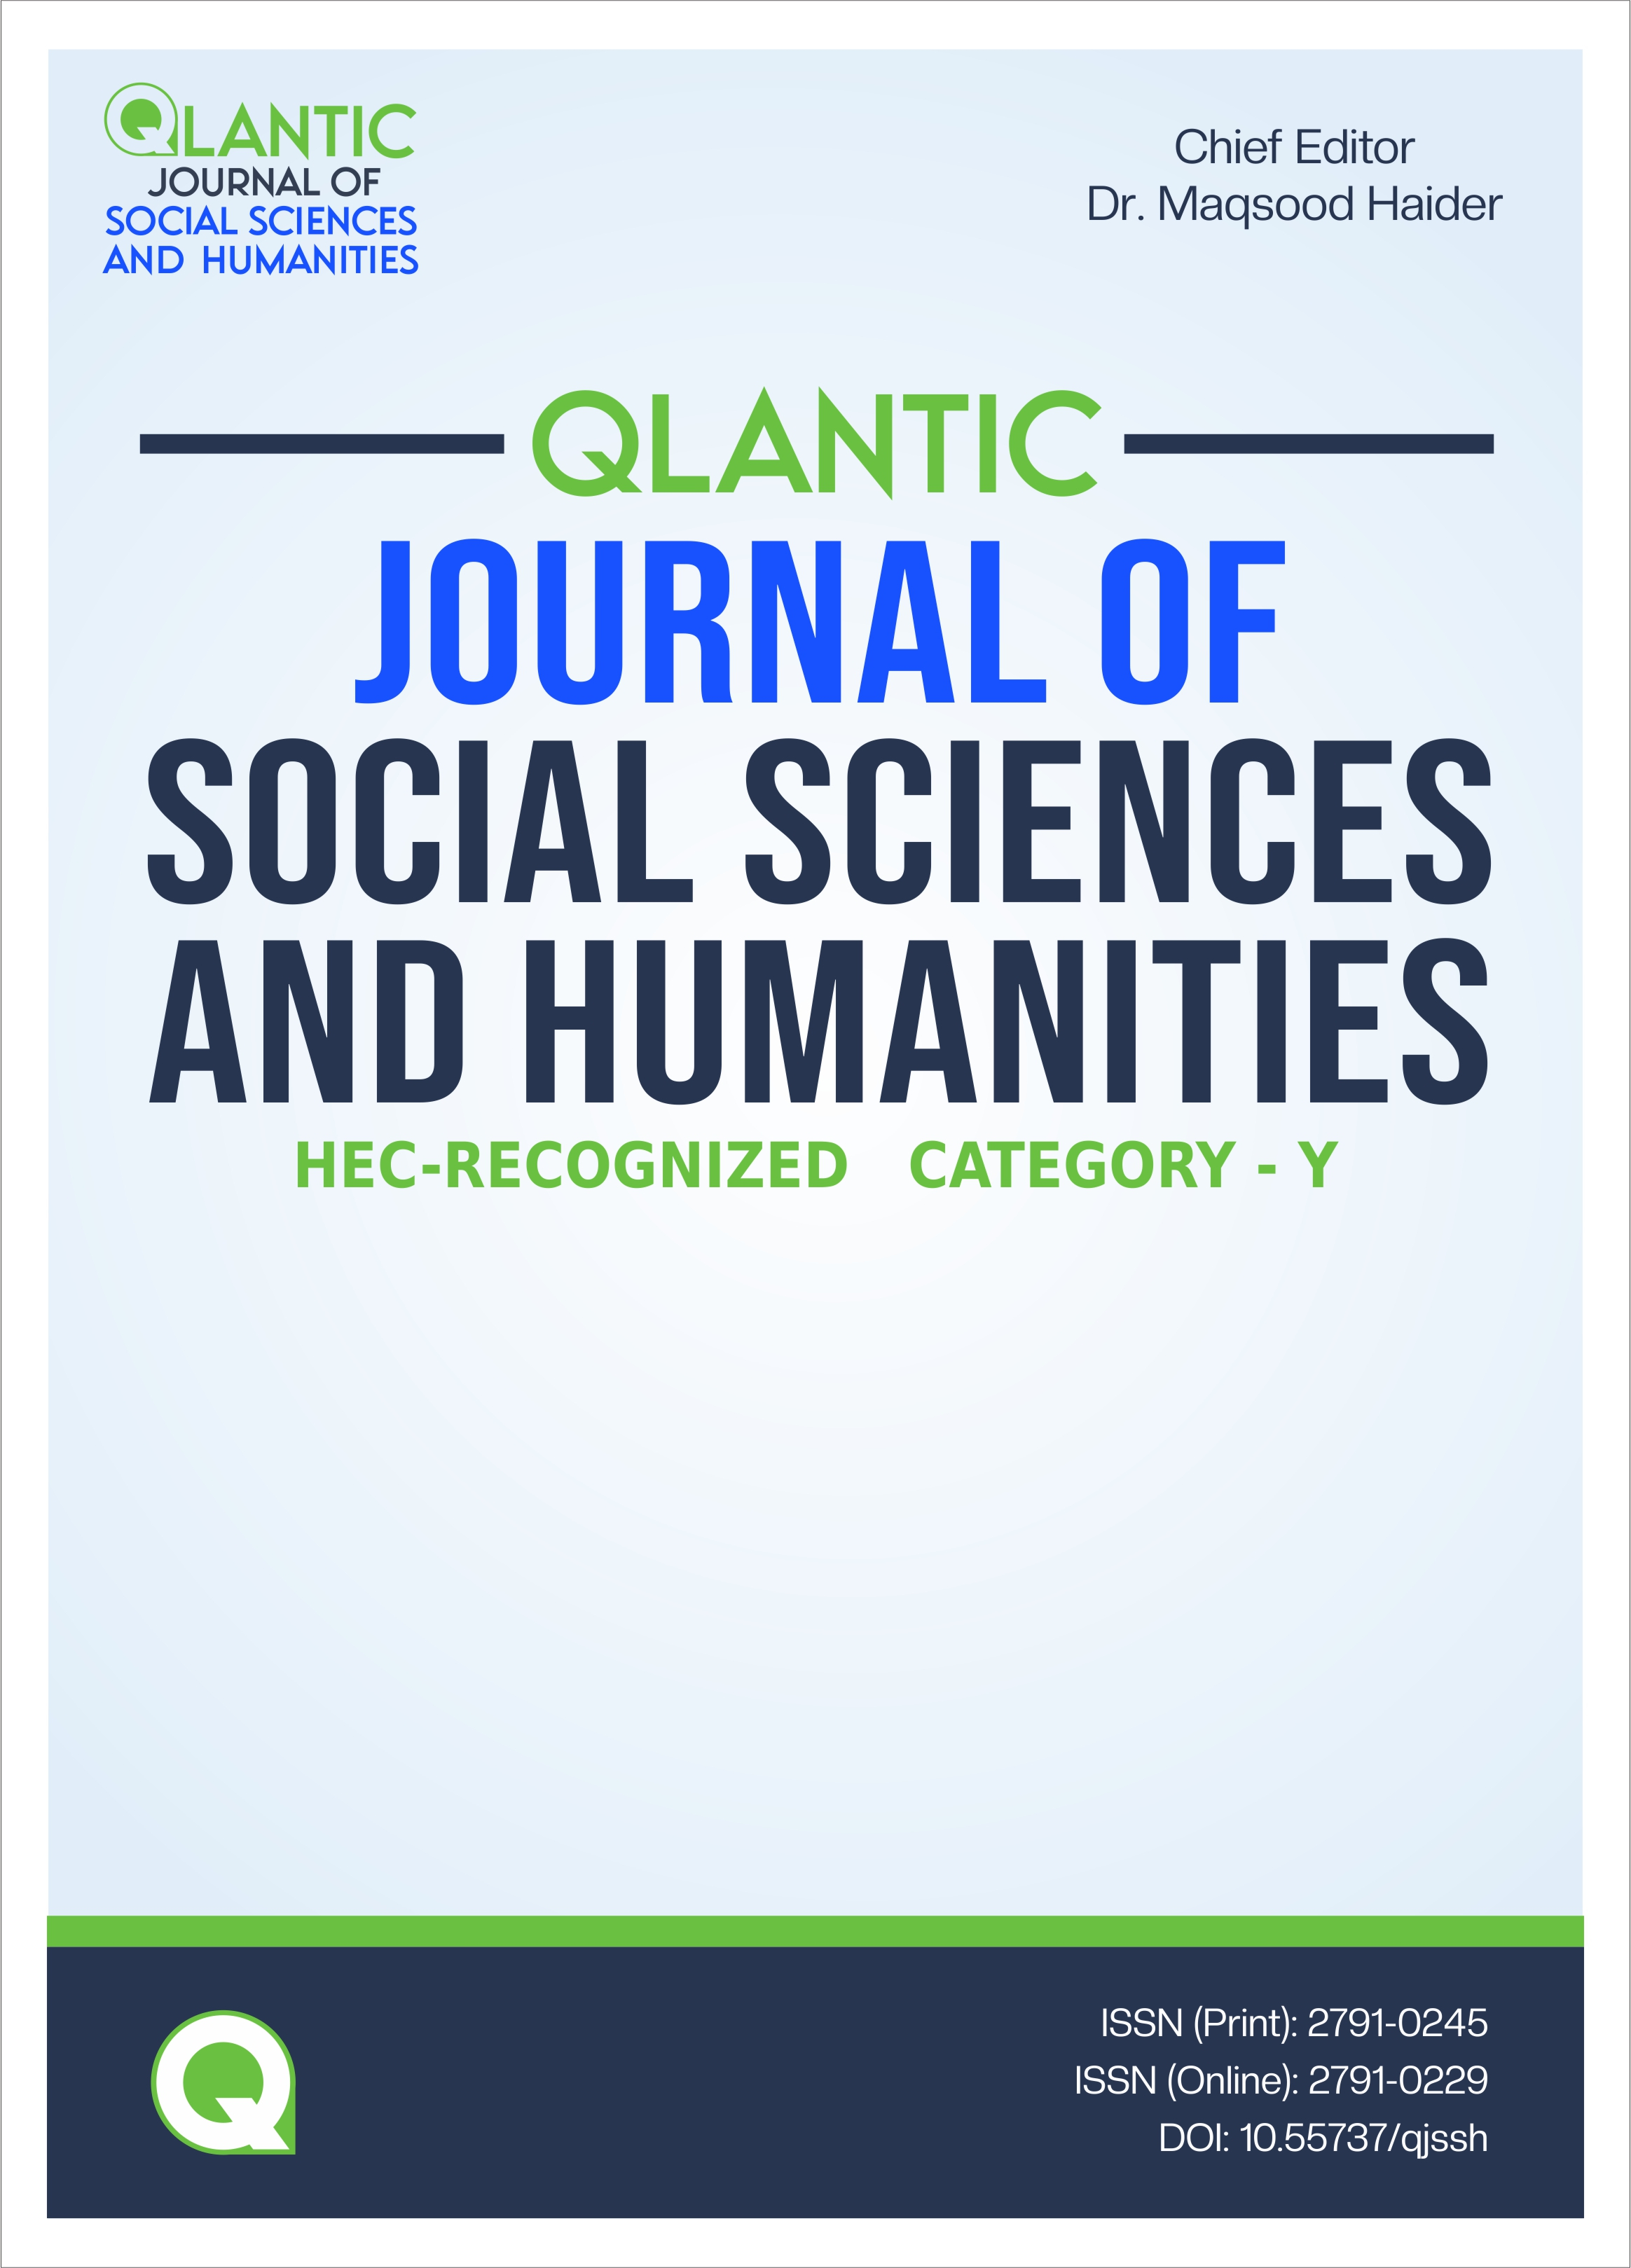 Qlantic Journal of Social Sciences and Humanities